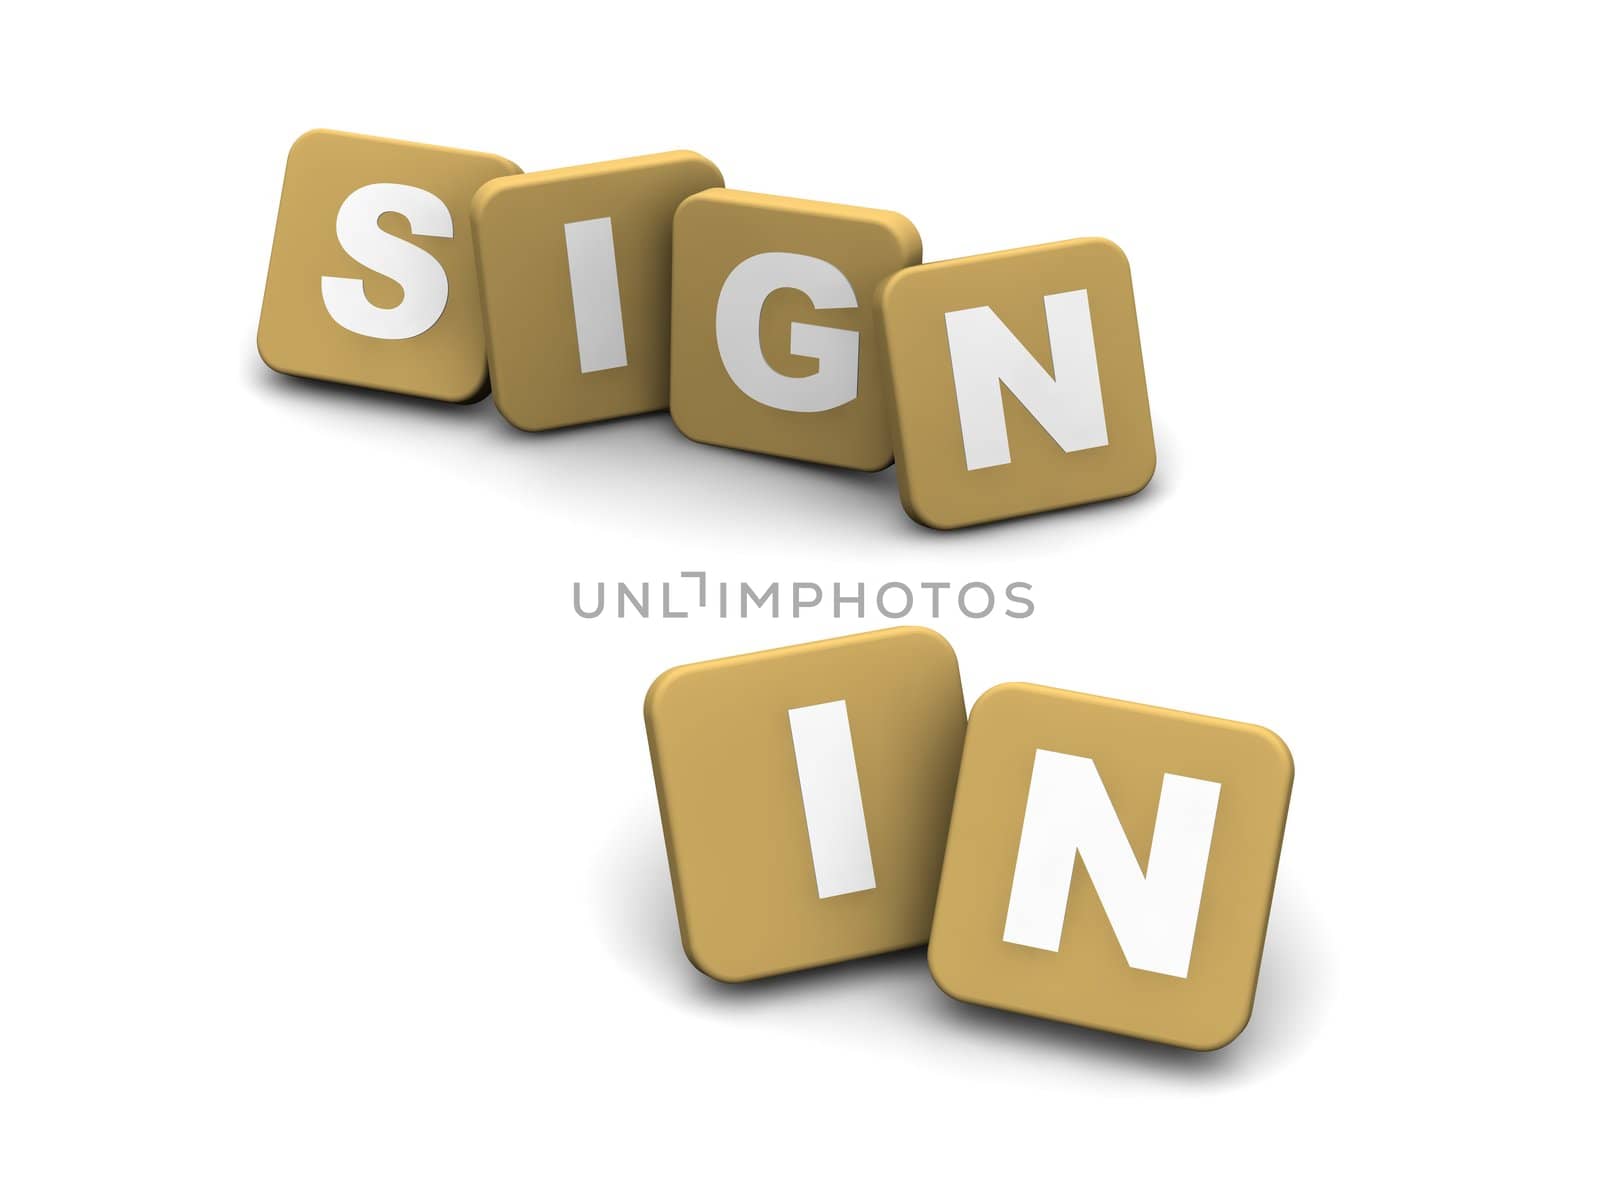 Sign in text. 3d rendered illustration isolated on white.